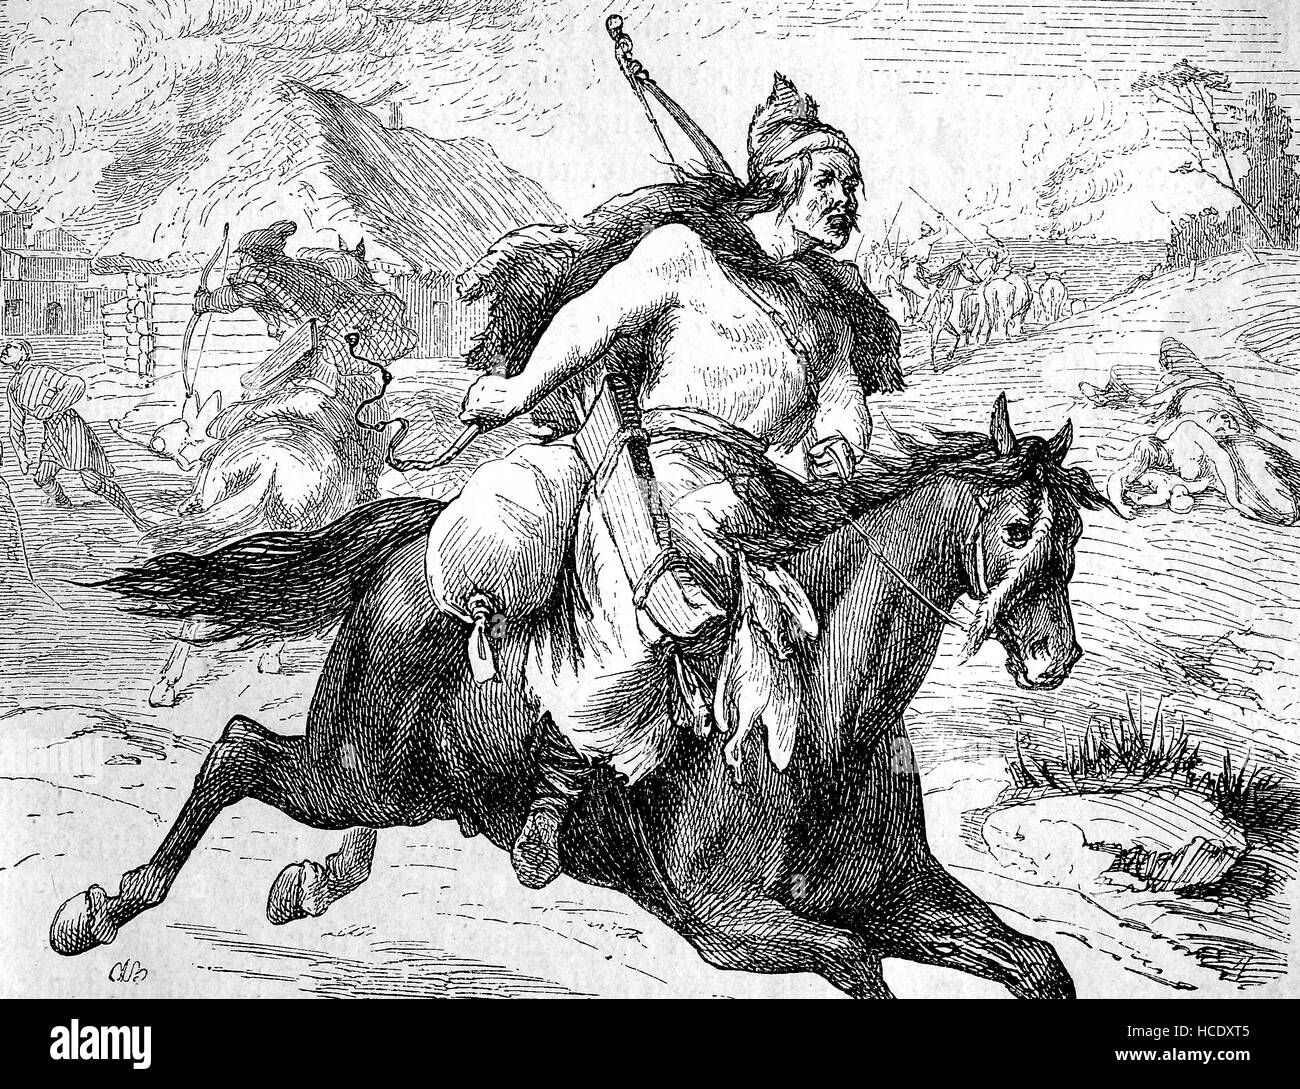 Hun Warrior on horseback at The Battle of the Catalaunian Plains, Fields, Battle of Chalons or the Battle of Maurica, June 20, 451 AD, the story of the ancient Rome, roman Empire, Italy Stock Photo